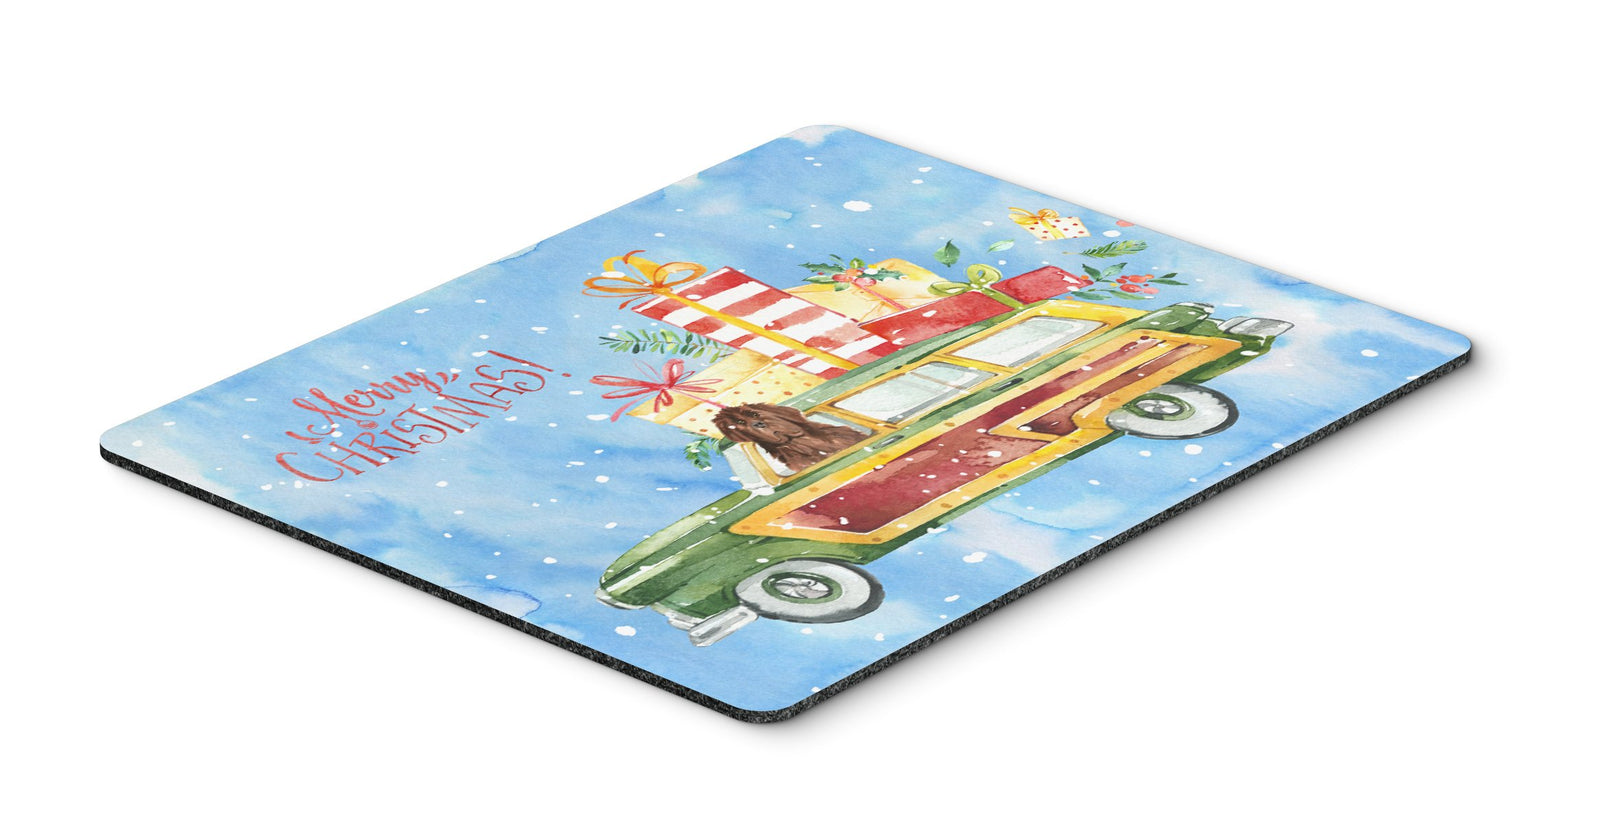 Merry Christmas Newfoundland Mouse Pad, Hot Pad or Trivet CK2416MP by Caroline's Treasures